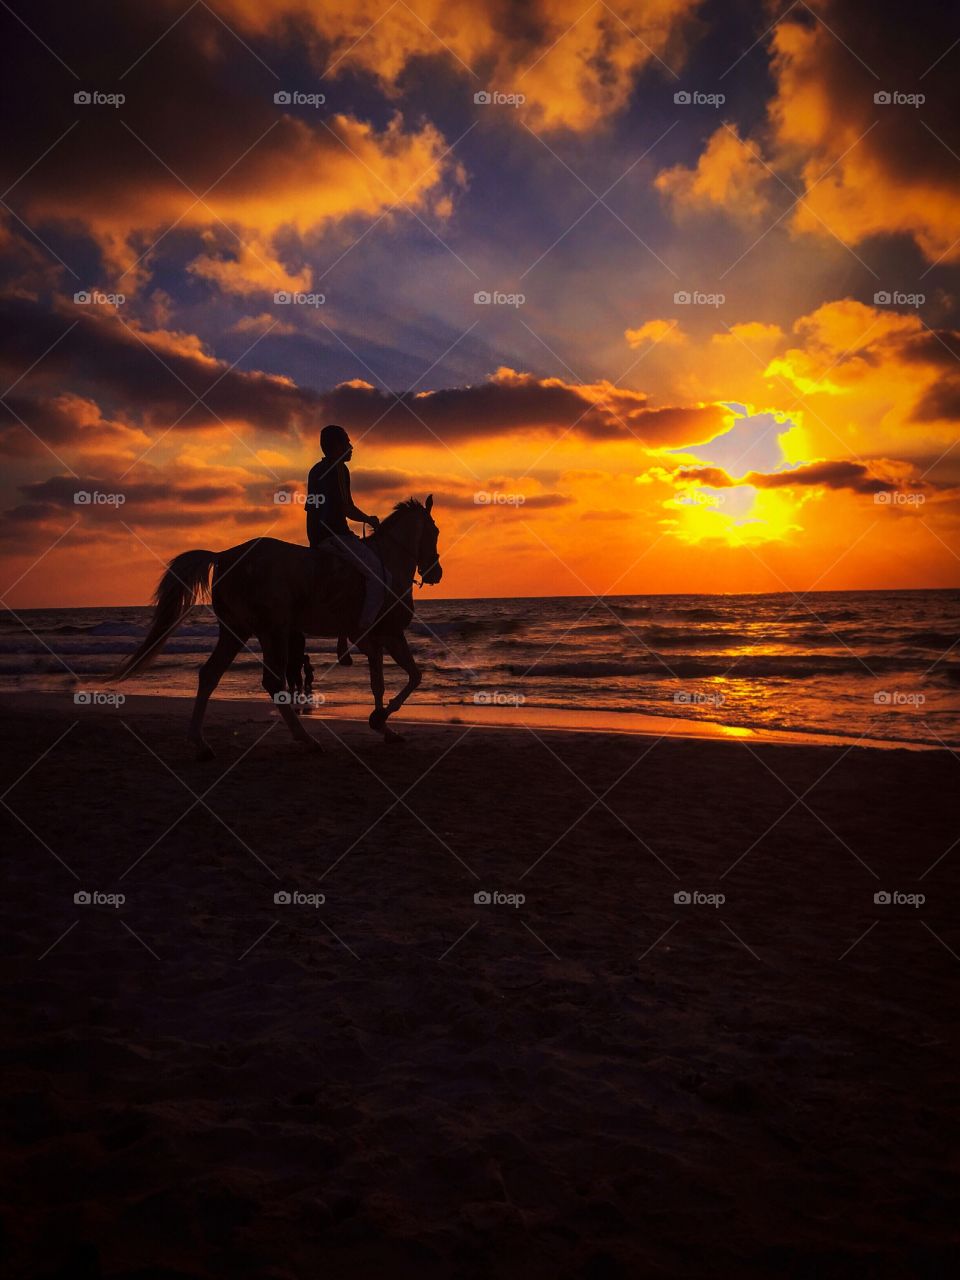 Sunset and a horse 